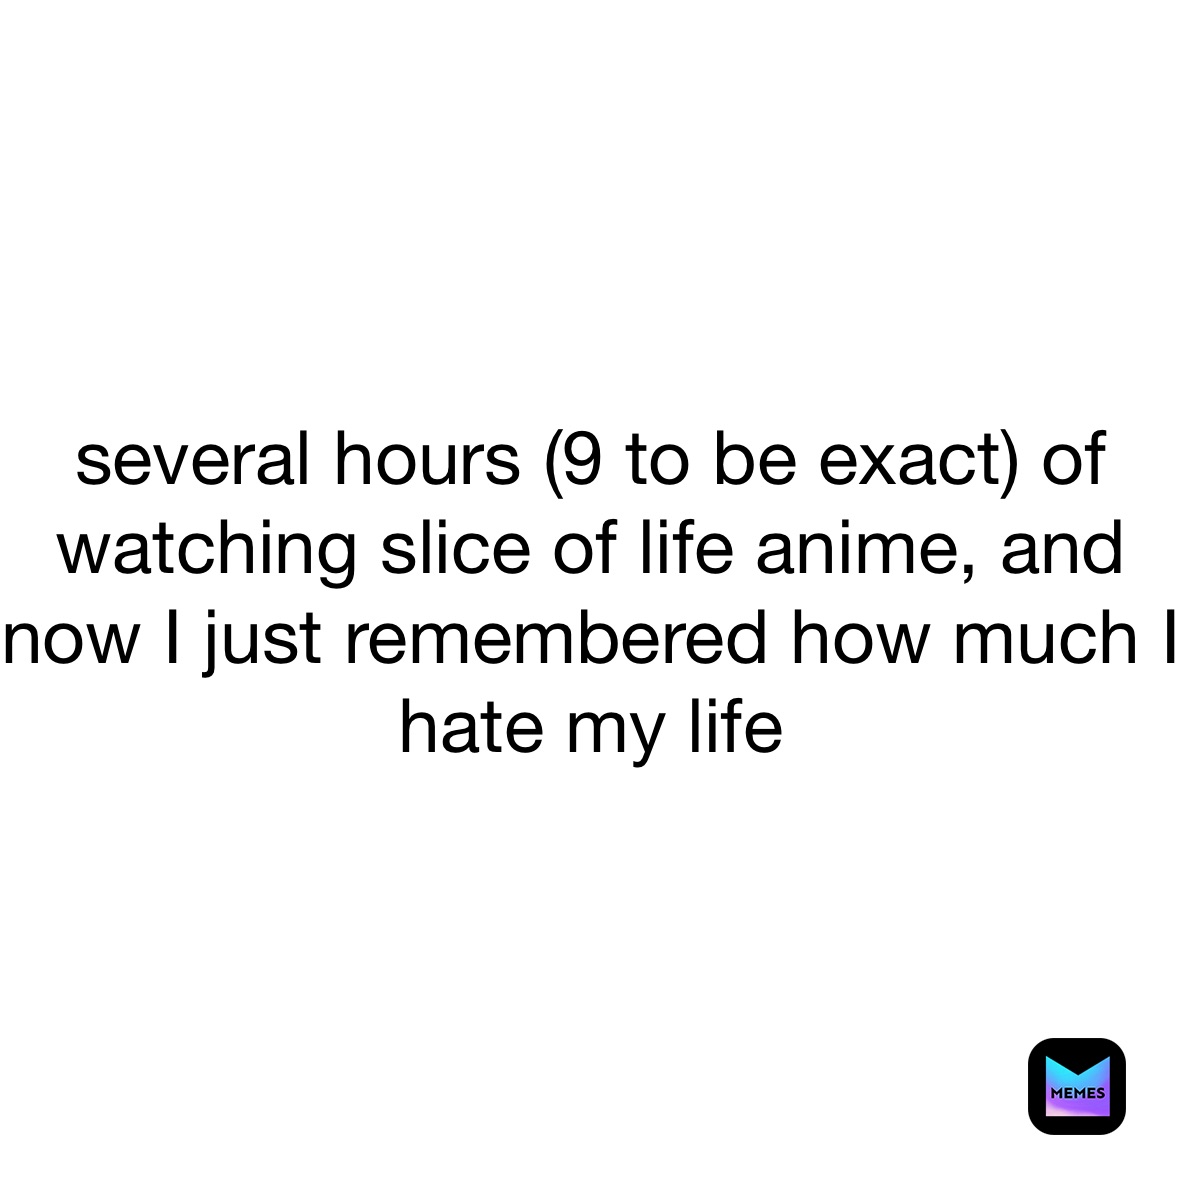 several hours (9 to be exact) of watching slice of life anime, and now I just remembered how much I hate my life 